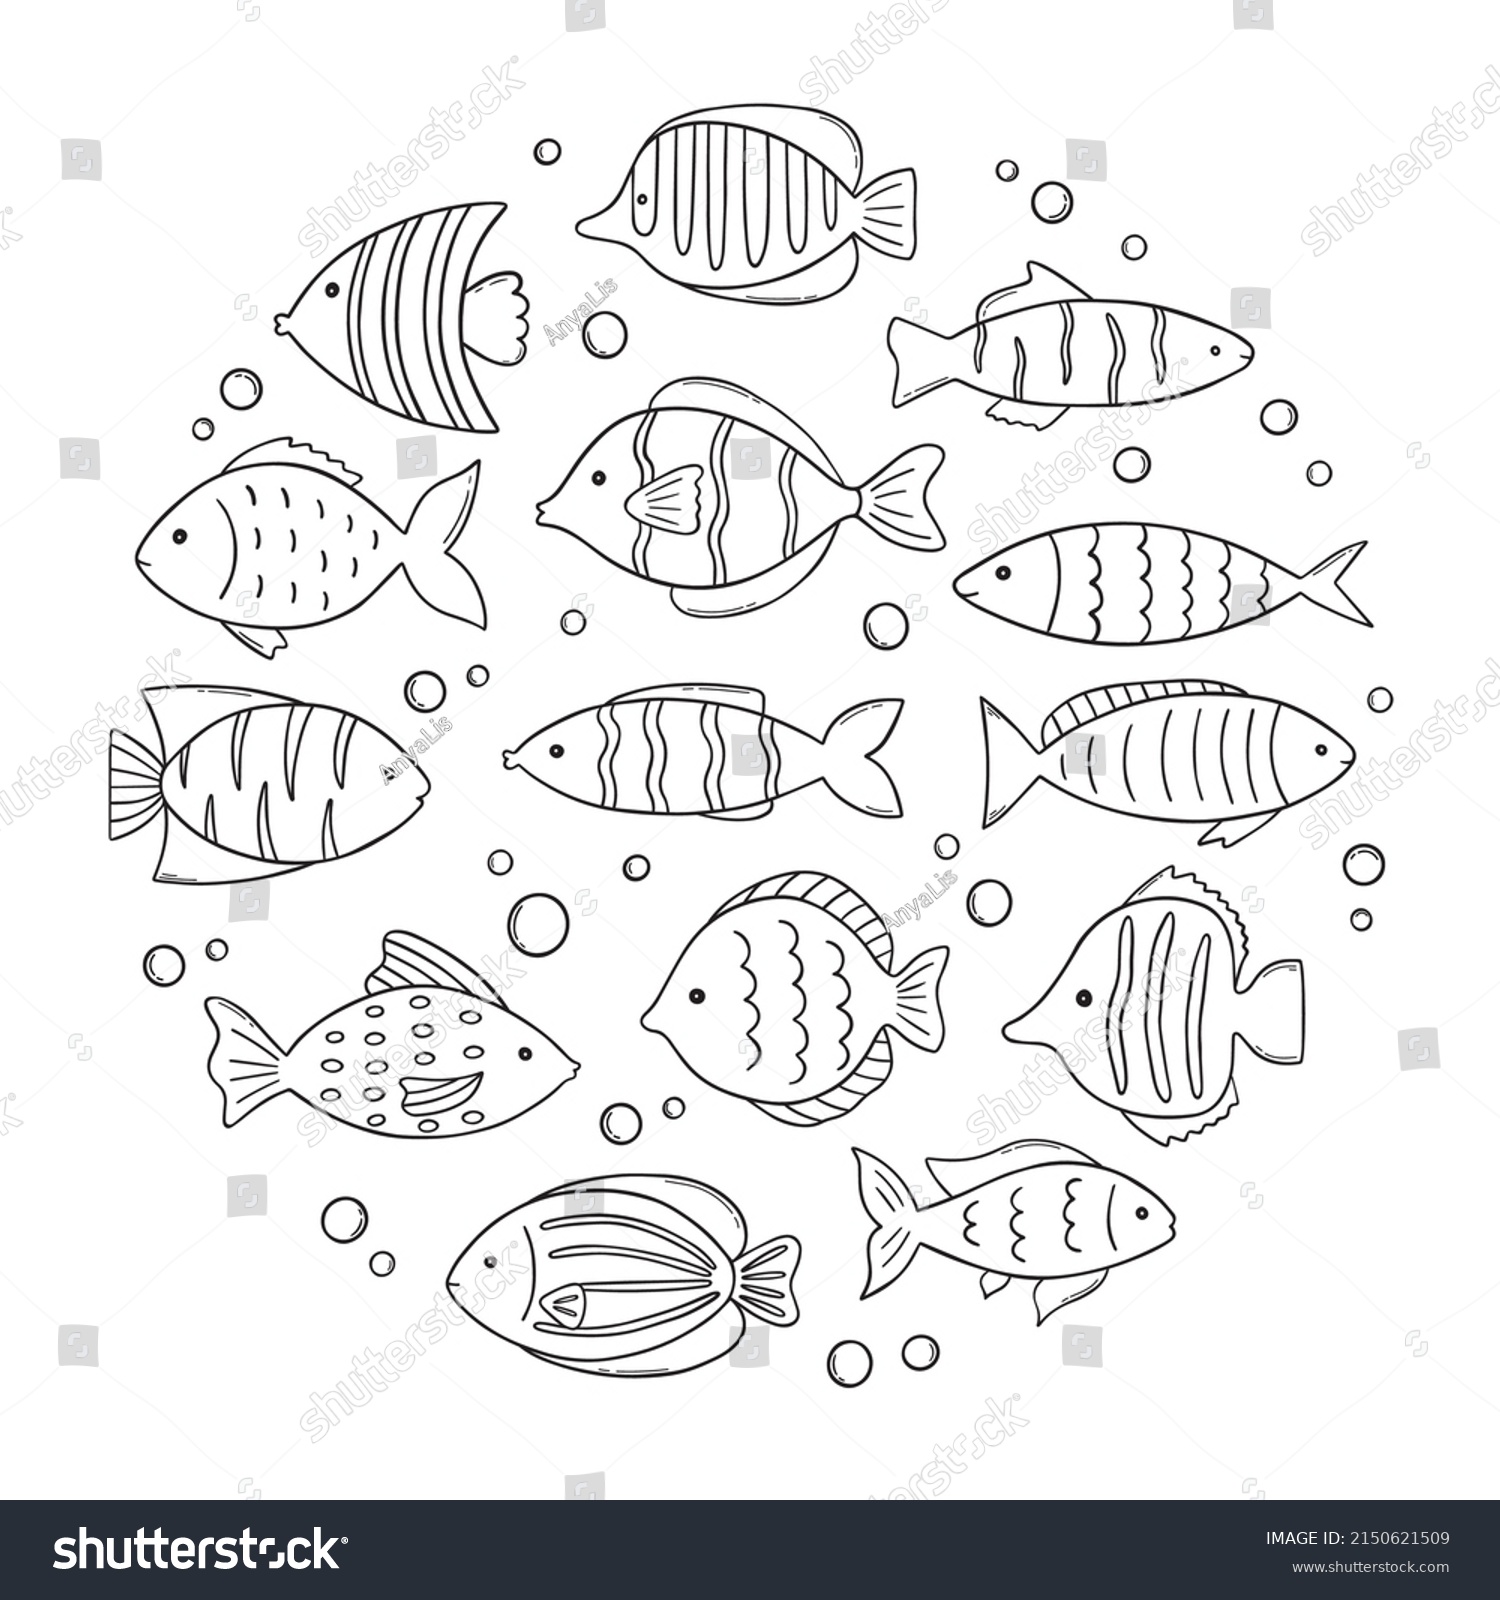 576,970 Black and white fish Images, Stock Photos & Vectors | Shutterstock